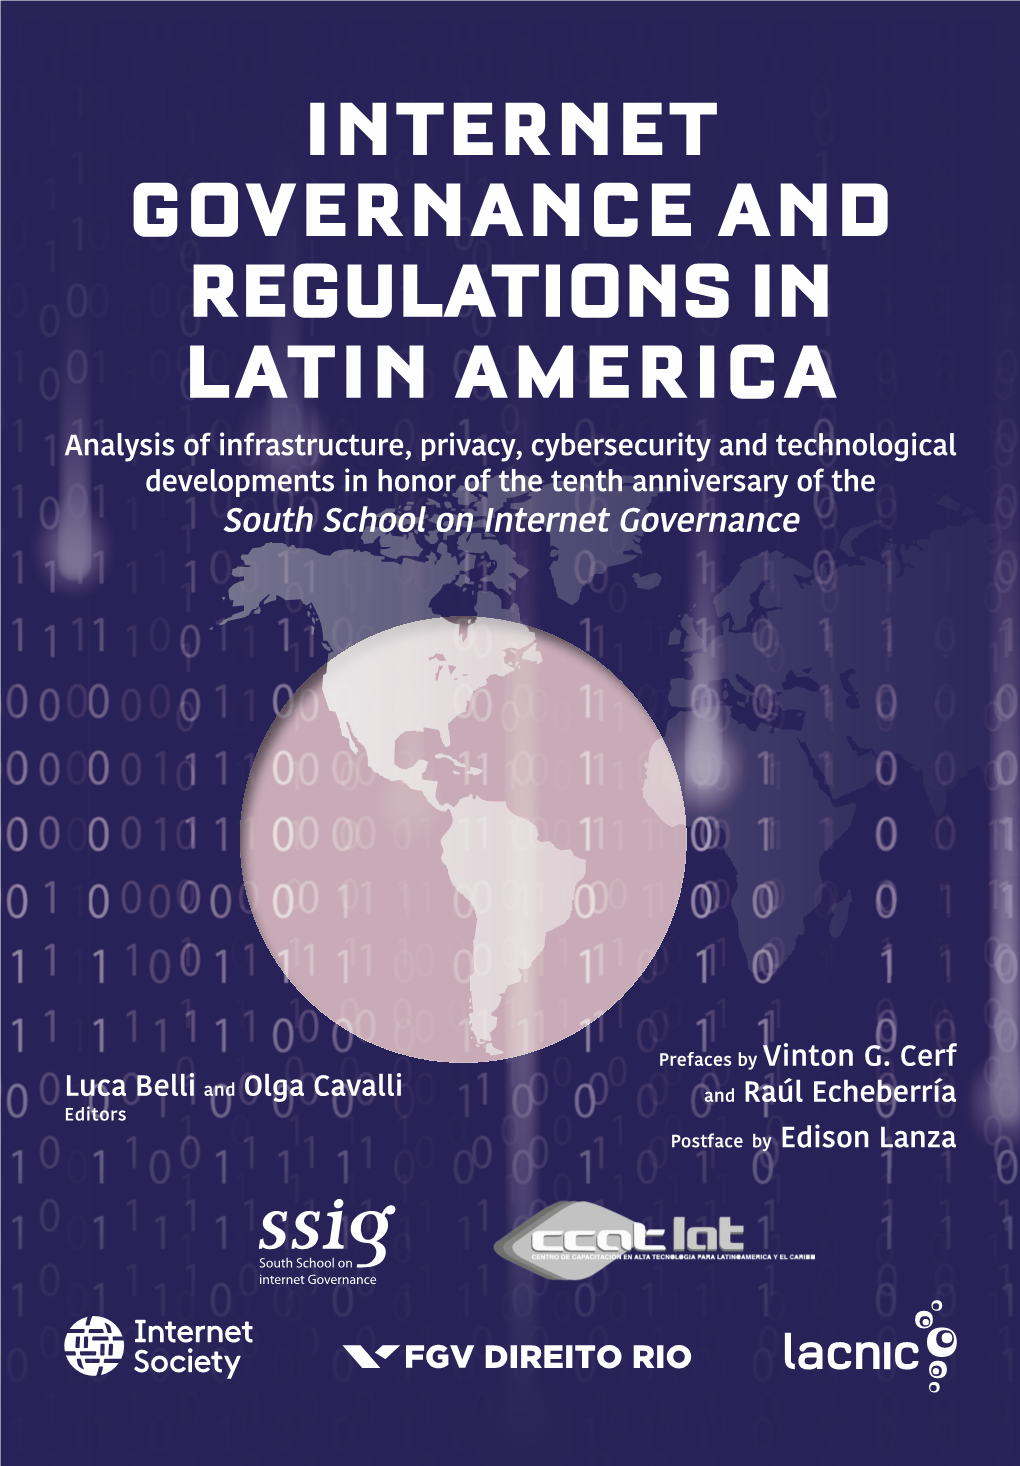 Internet Governance and Regulations in Latin America